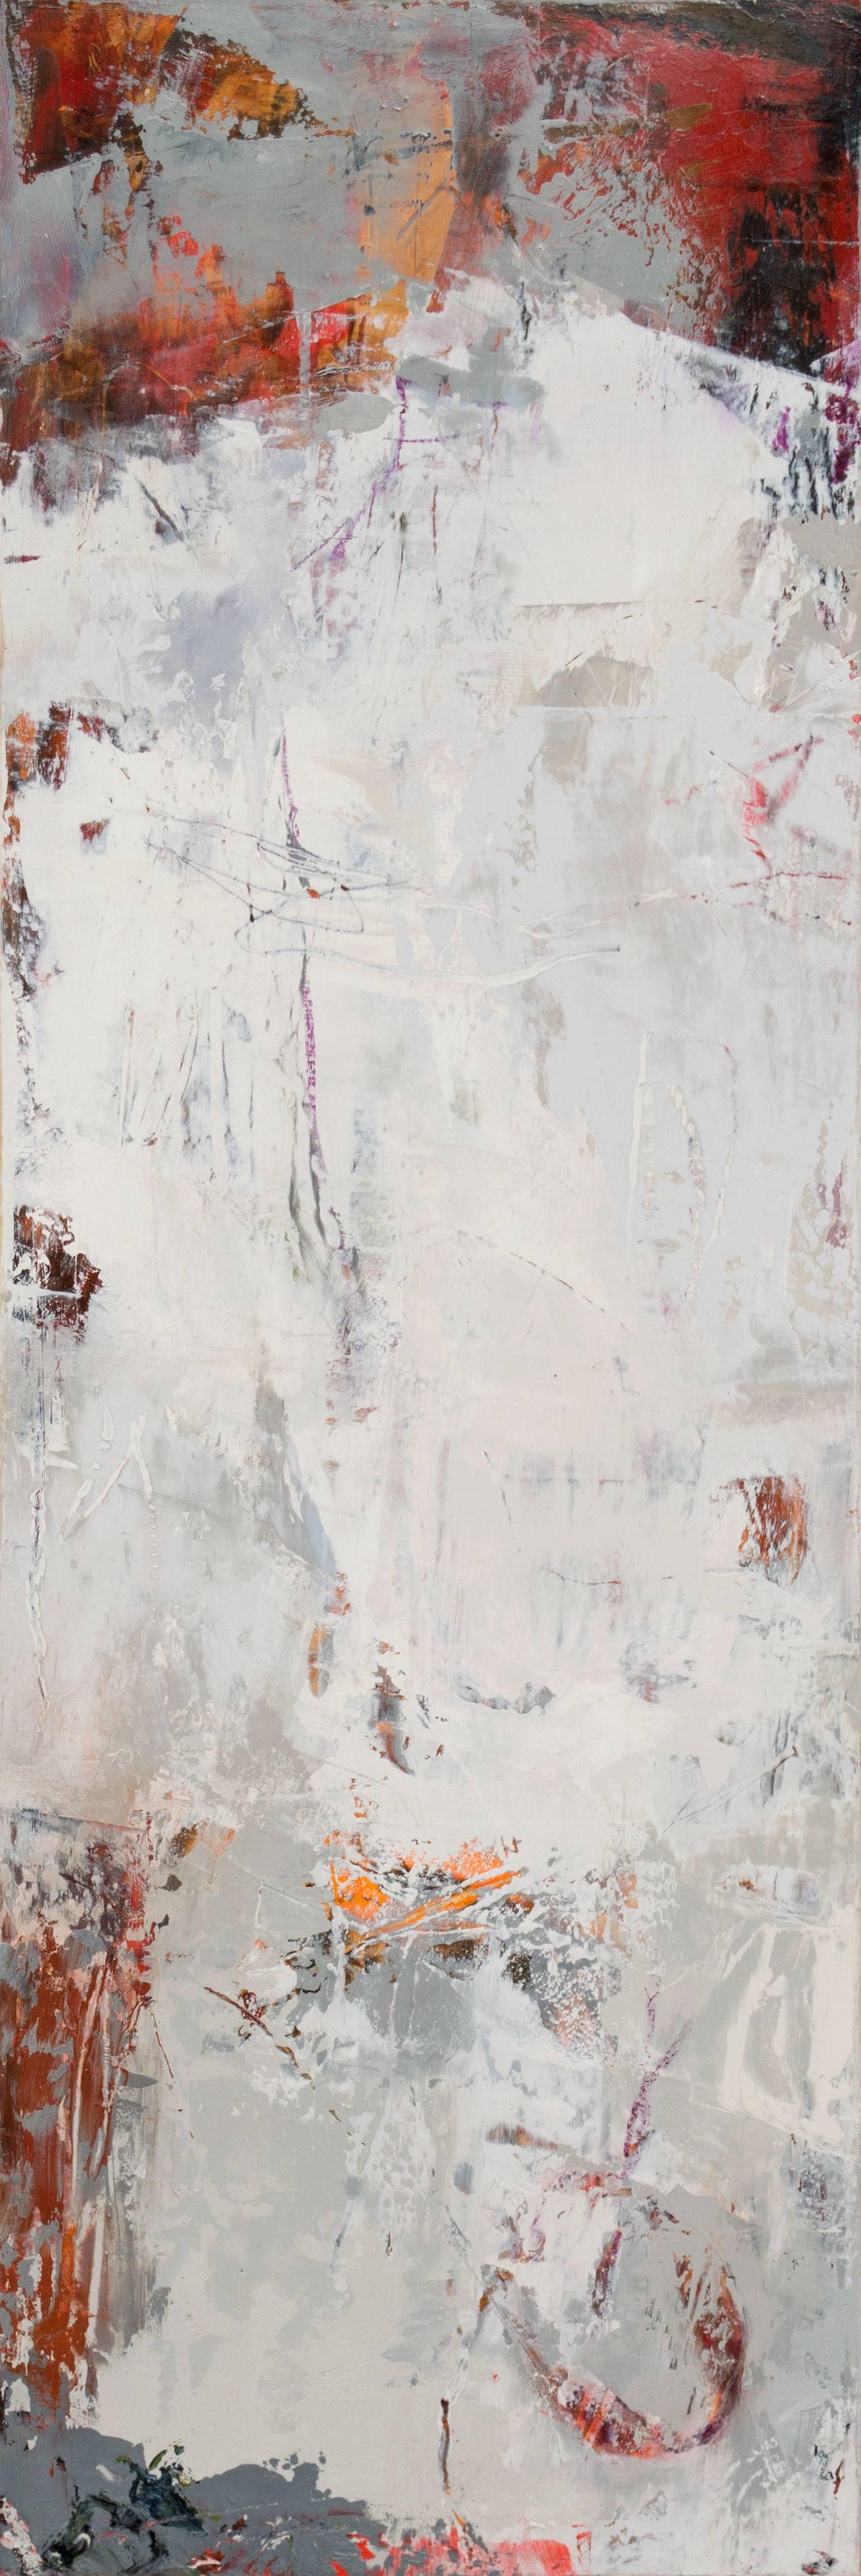 Contemplation IV-VIII - Gray Abstract Painting by Martha Rea Baker